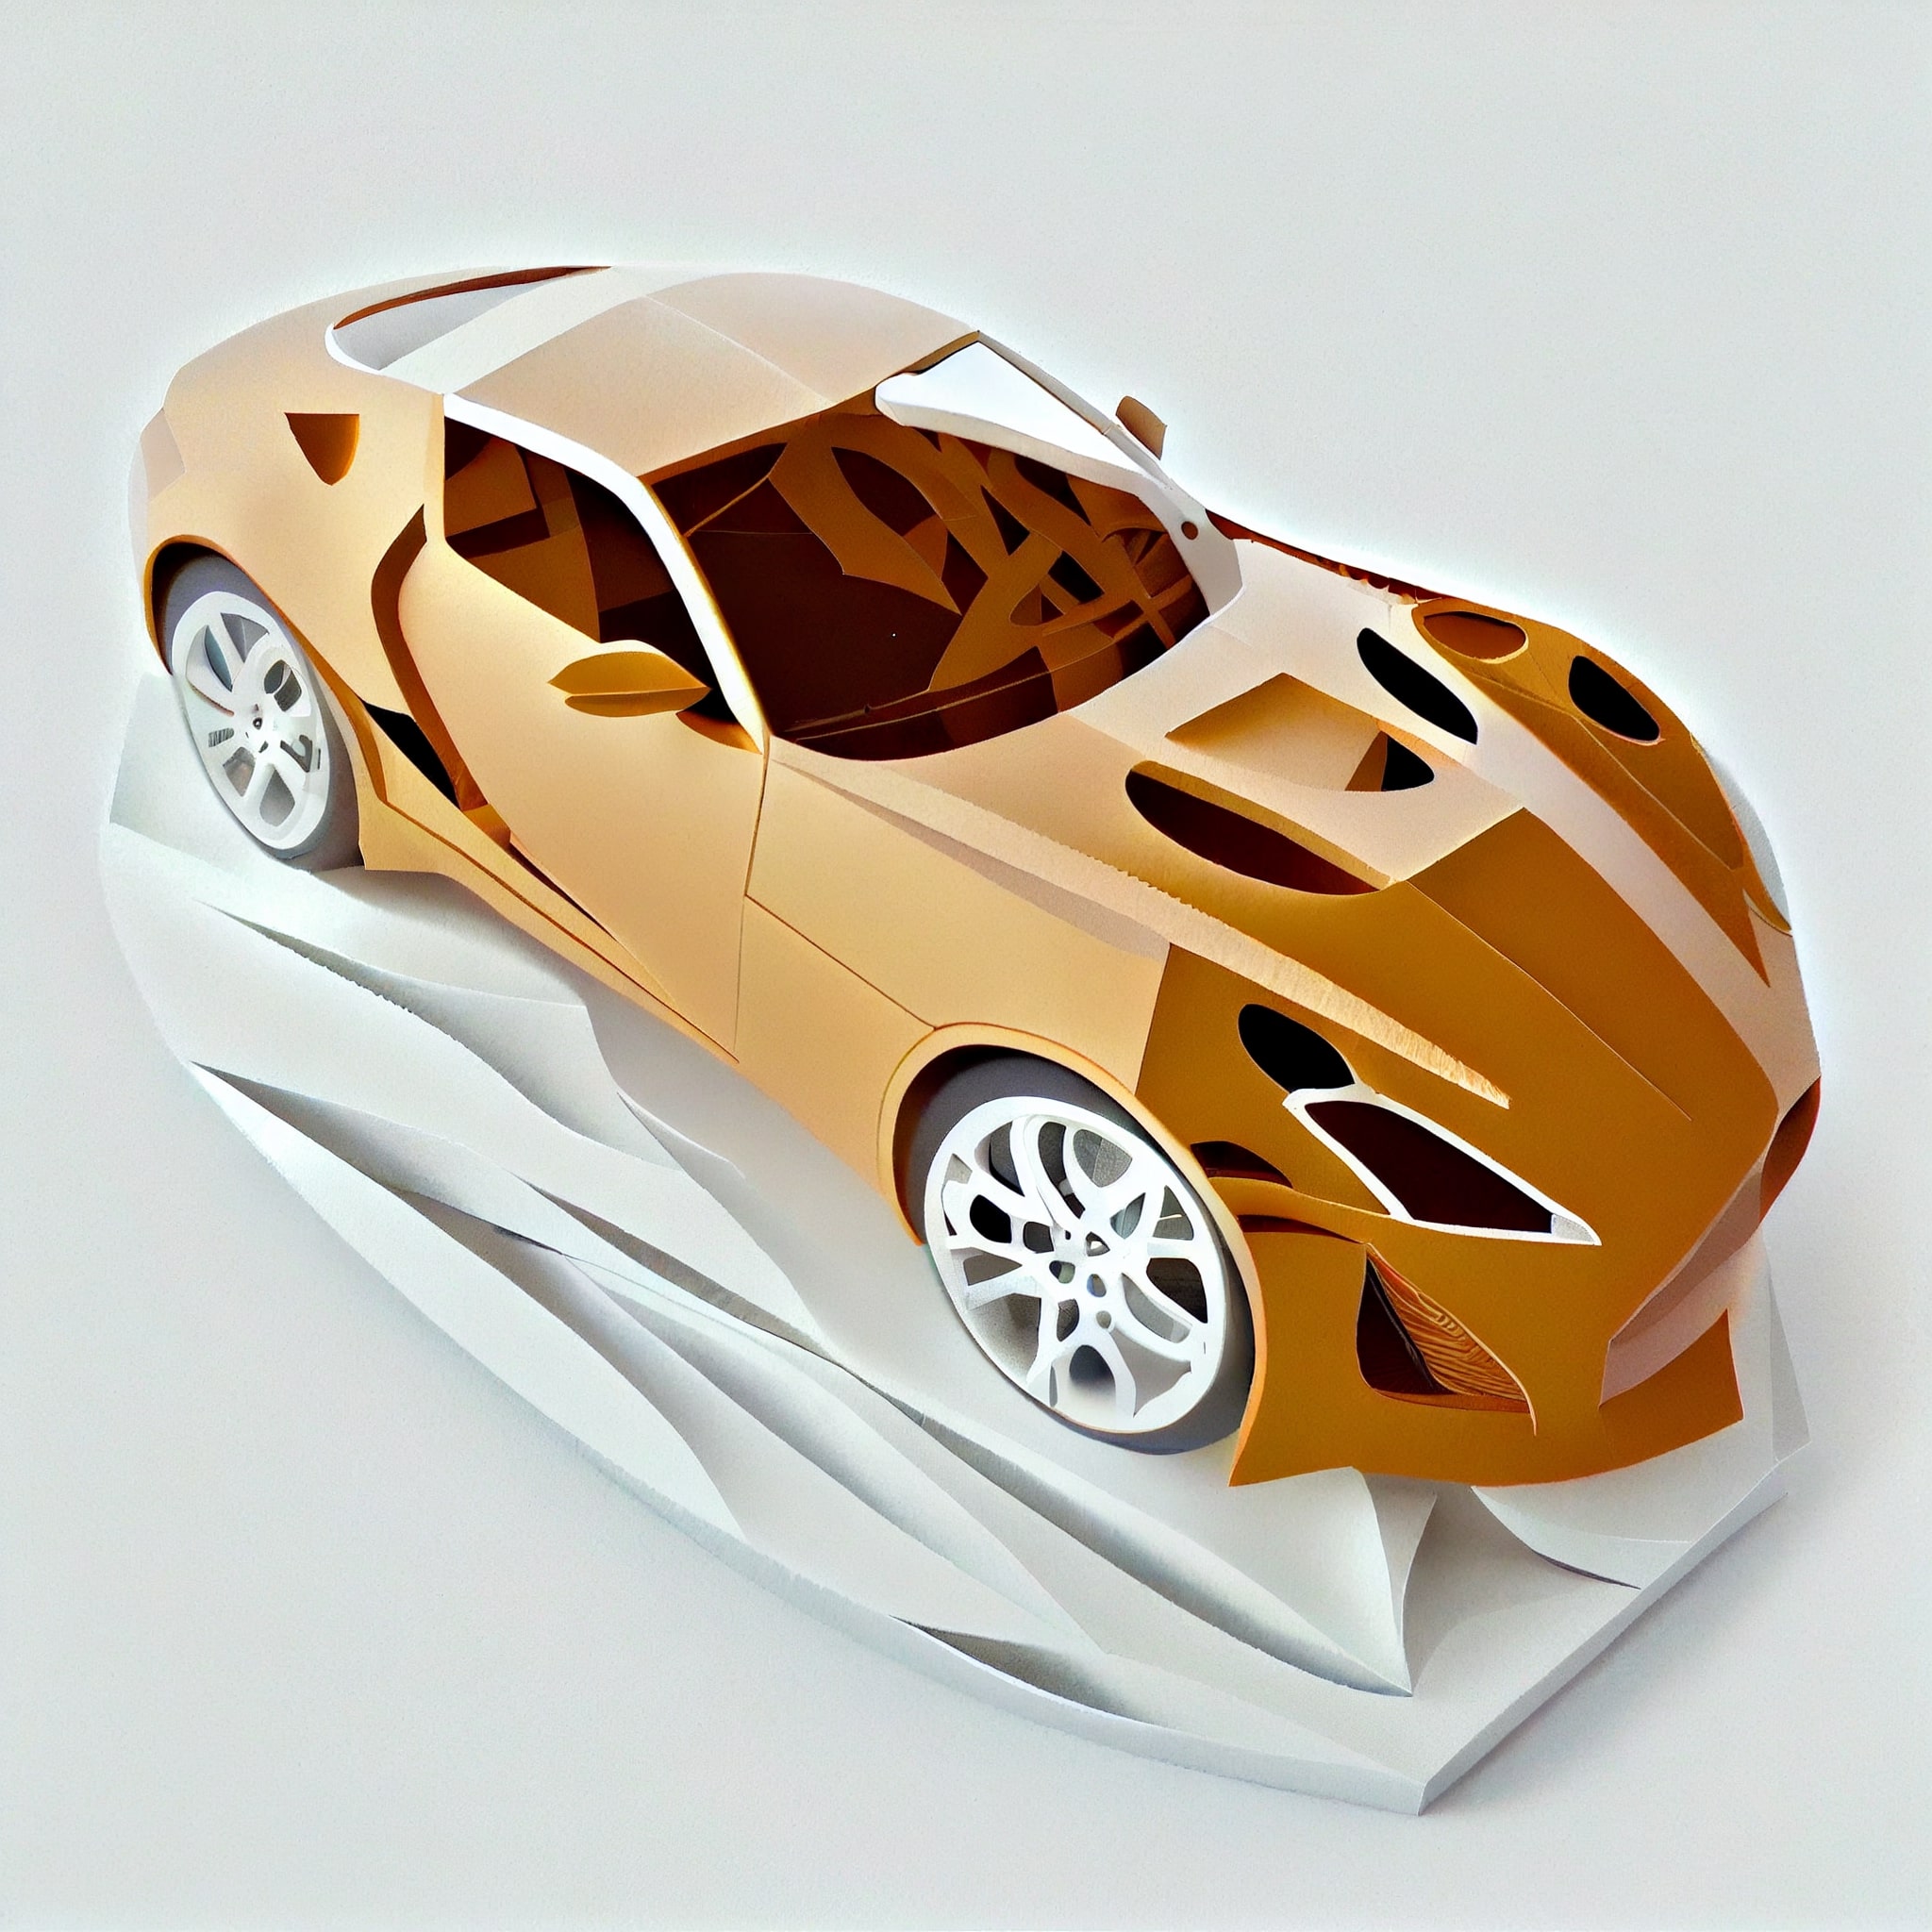 Paper model of a sports car on a white surface.